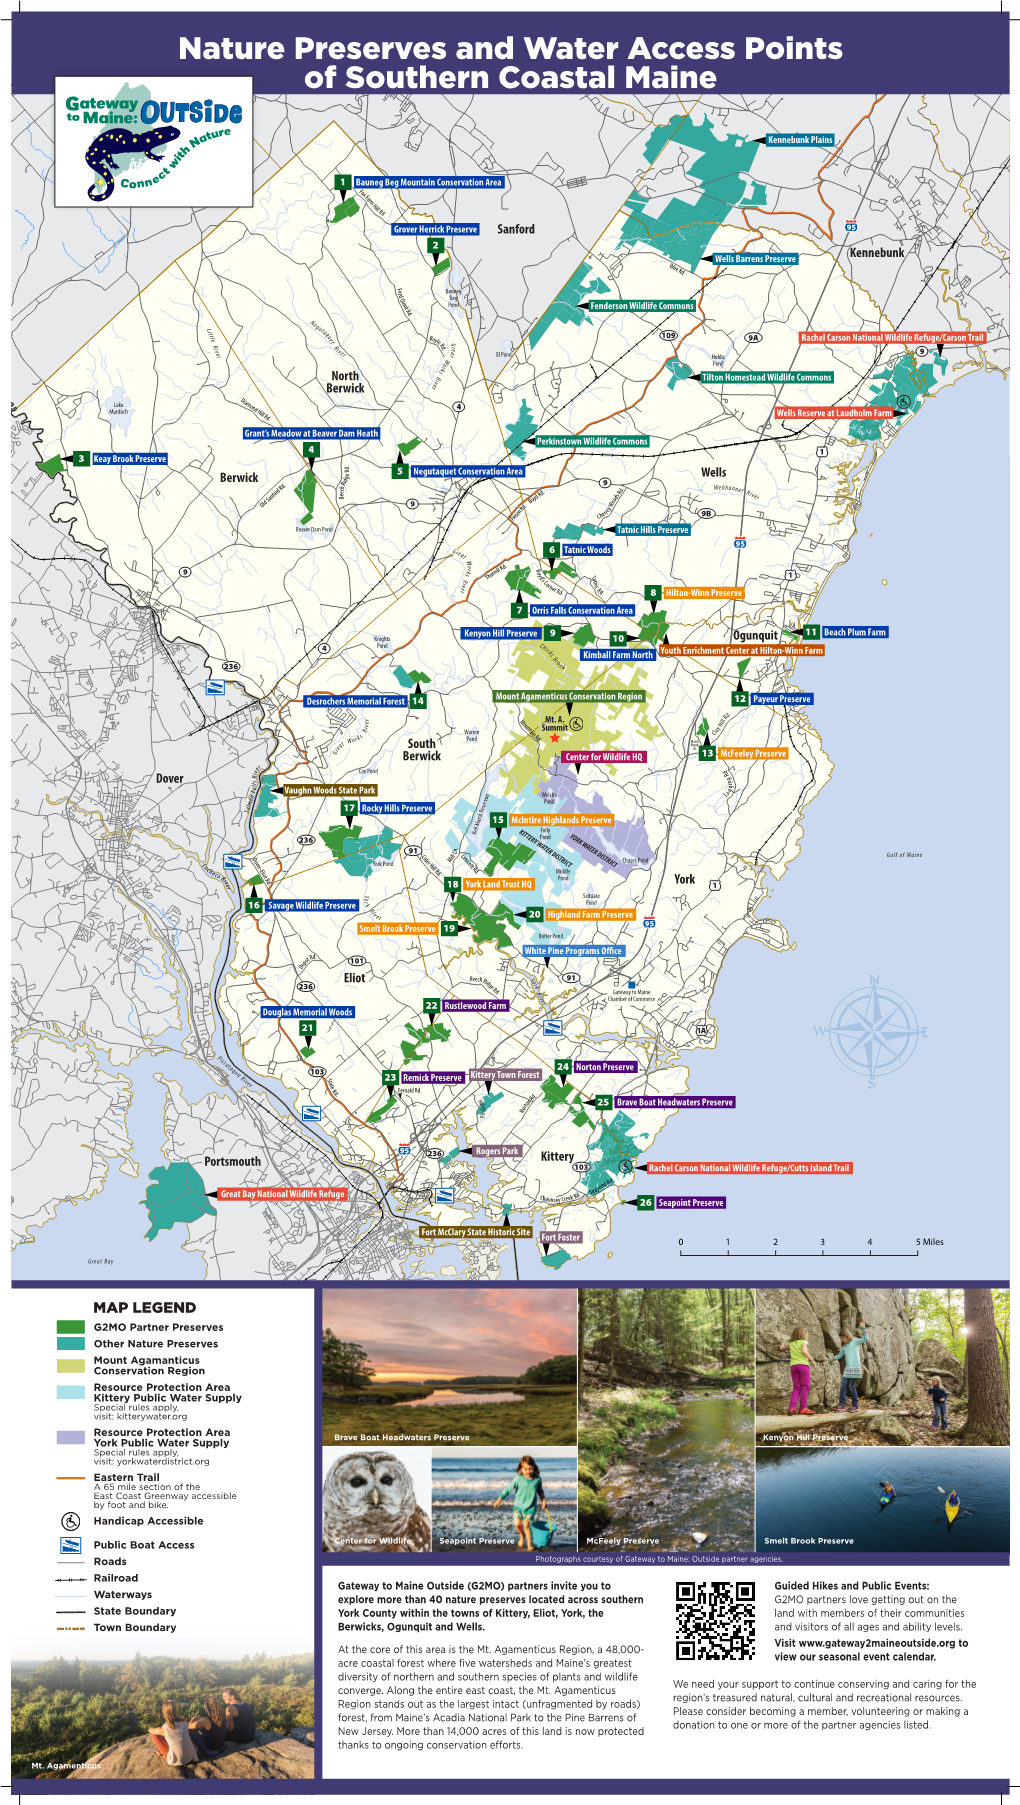 Nature Preserves and Water Access Points of Southern Coastal Maine